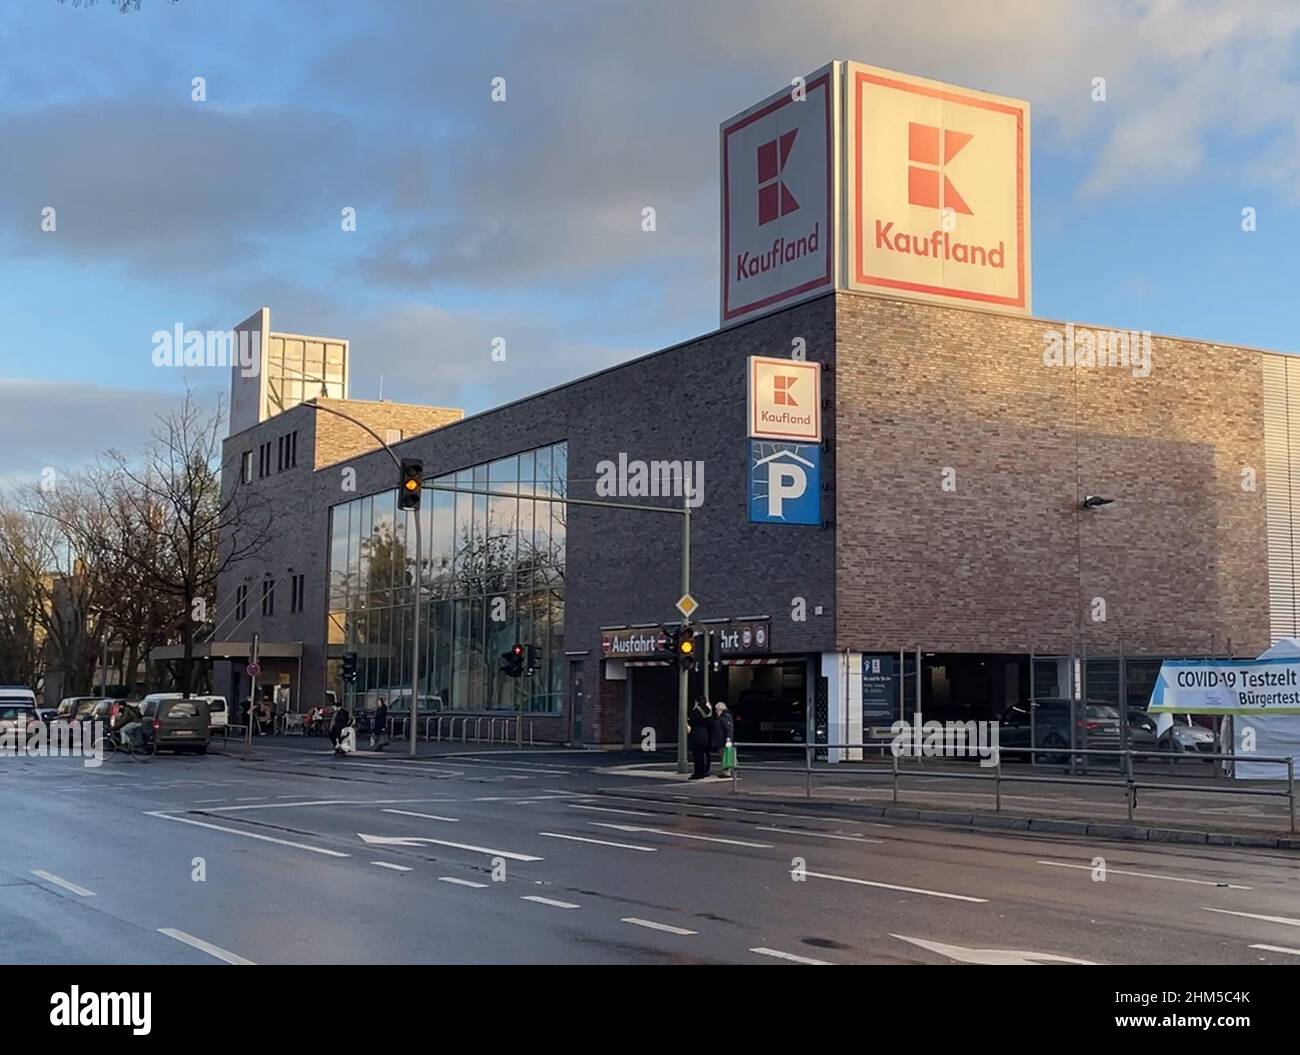 Kaufland store High Resolution Stock Photography and Images - Alamy